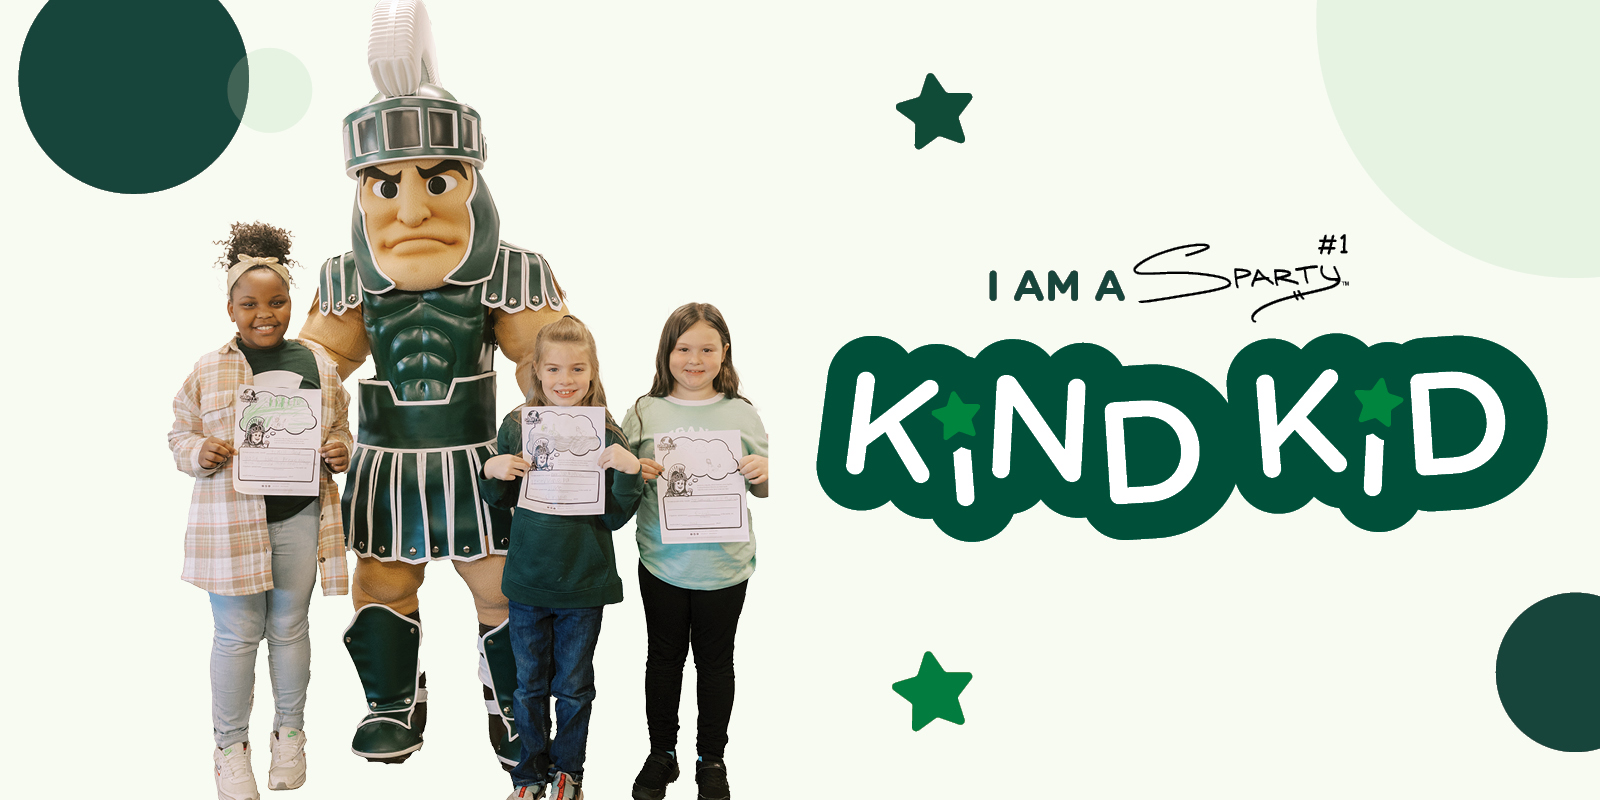 Sparty with a group of kids and the words "I am a Sparty Kind Kid"